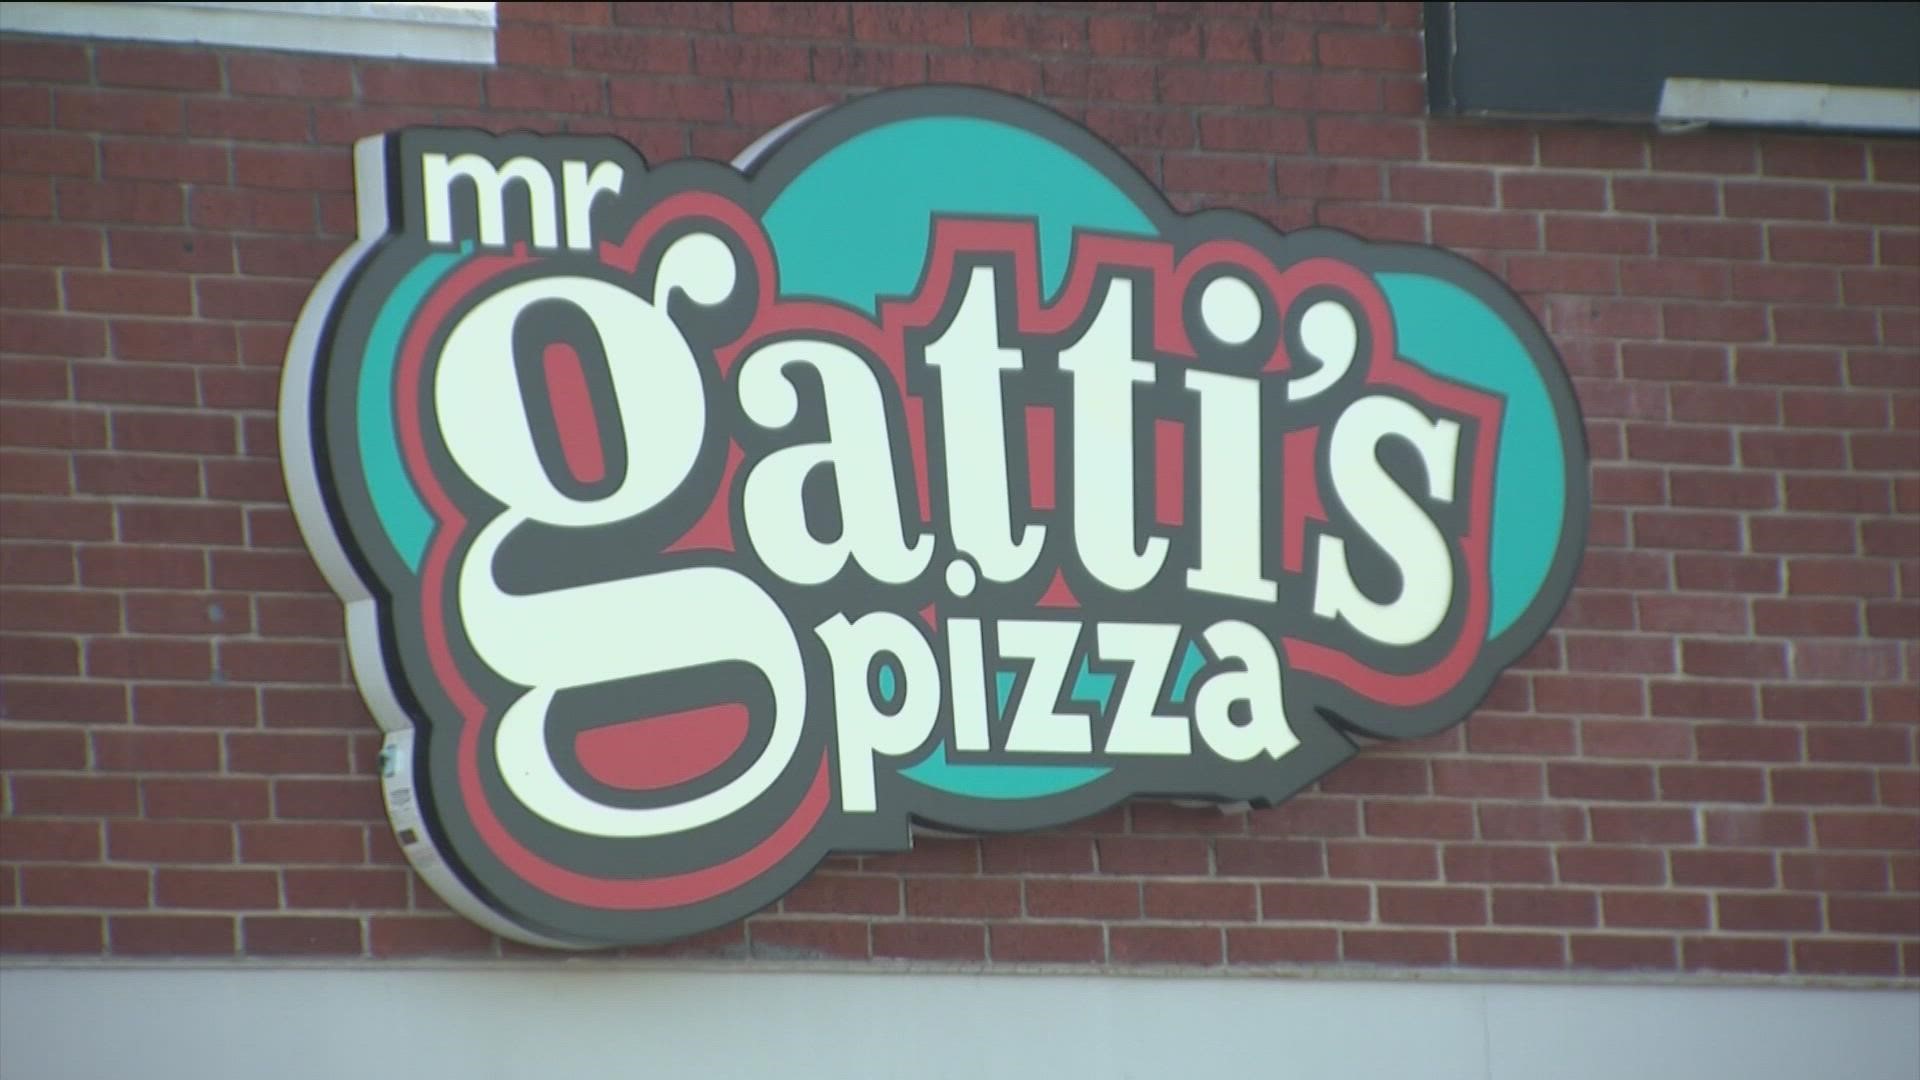 Mr. Gatti's Pizza has been an Austin classic for the last 53 years. Now in 2022, they're expanding.